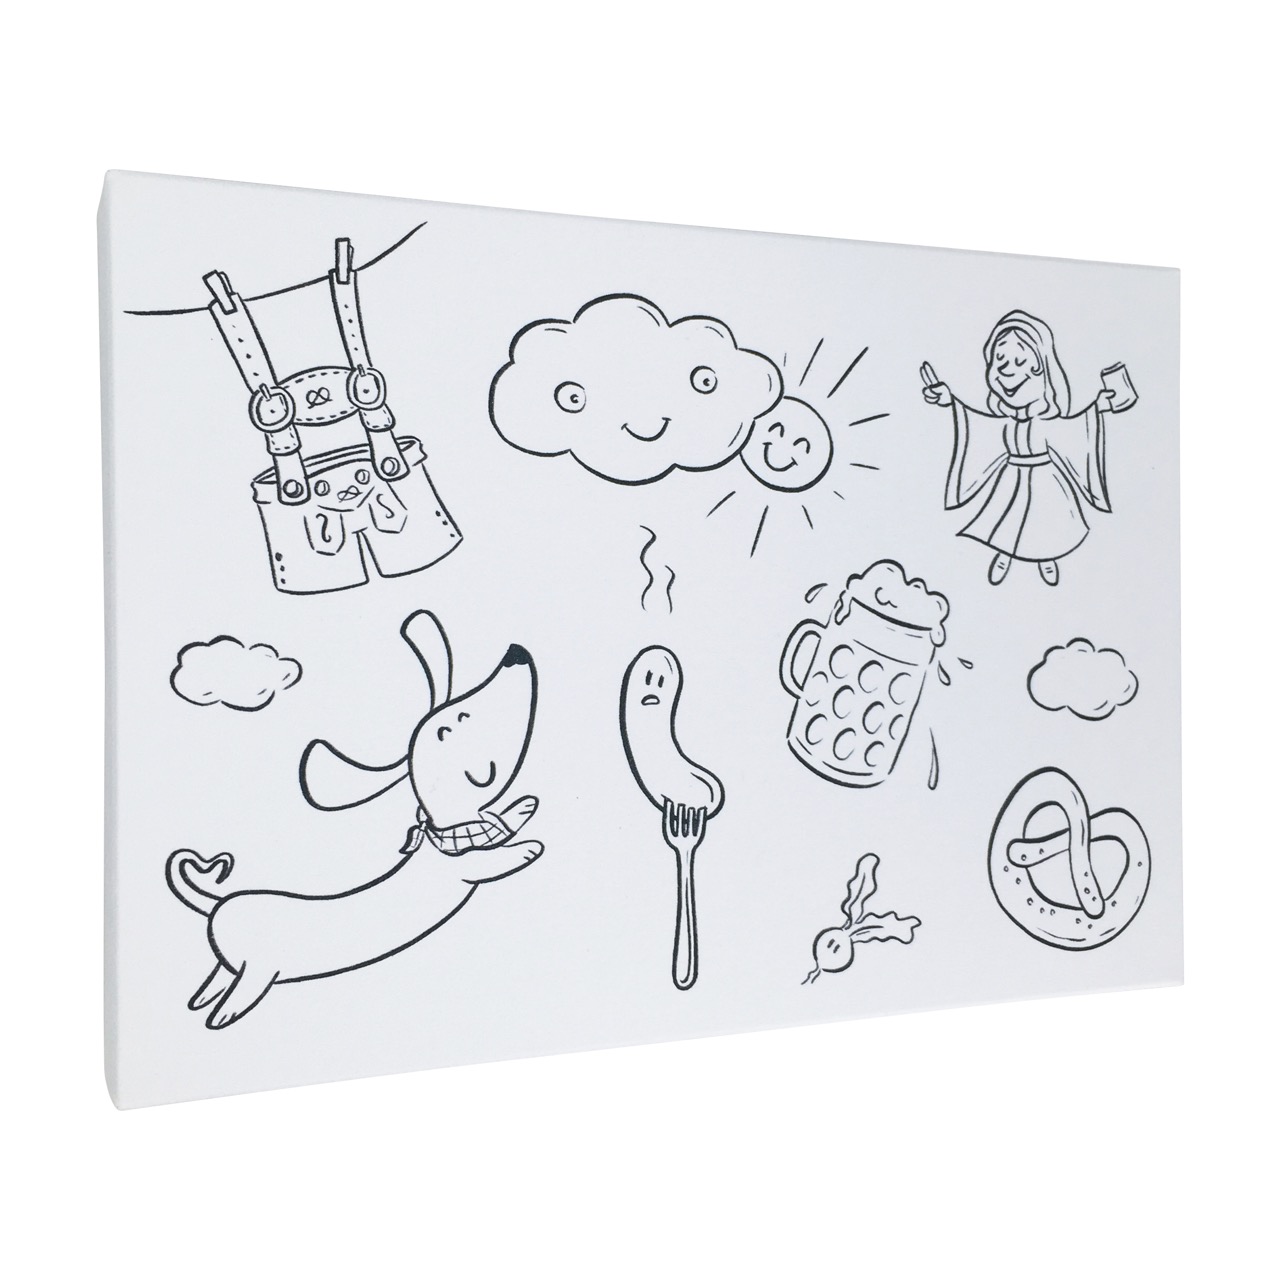 Buntbox Frame M cardboard canvas (21 cm x 14.8 cm) with Munich Sky for colouring